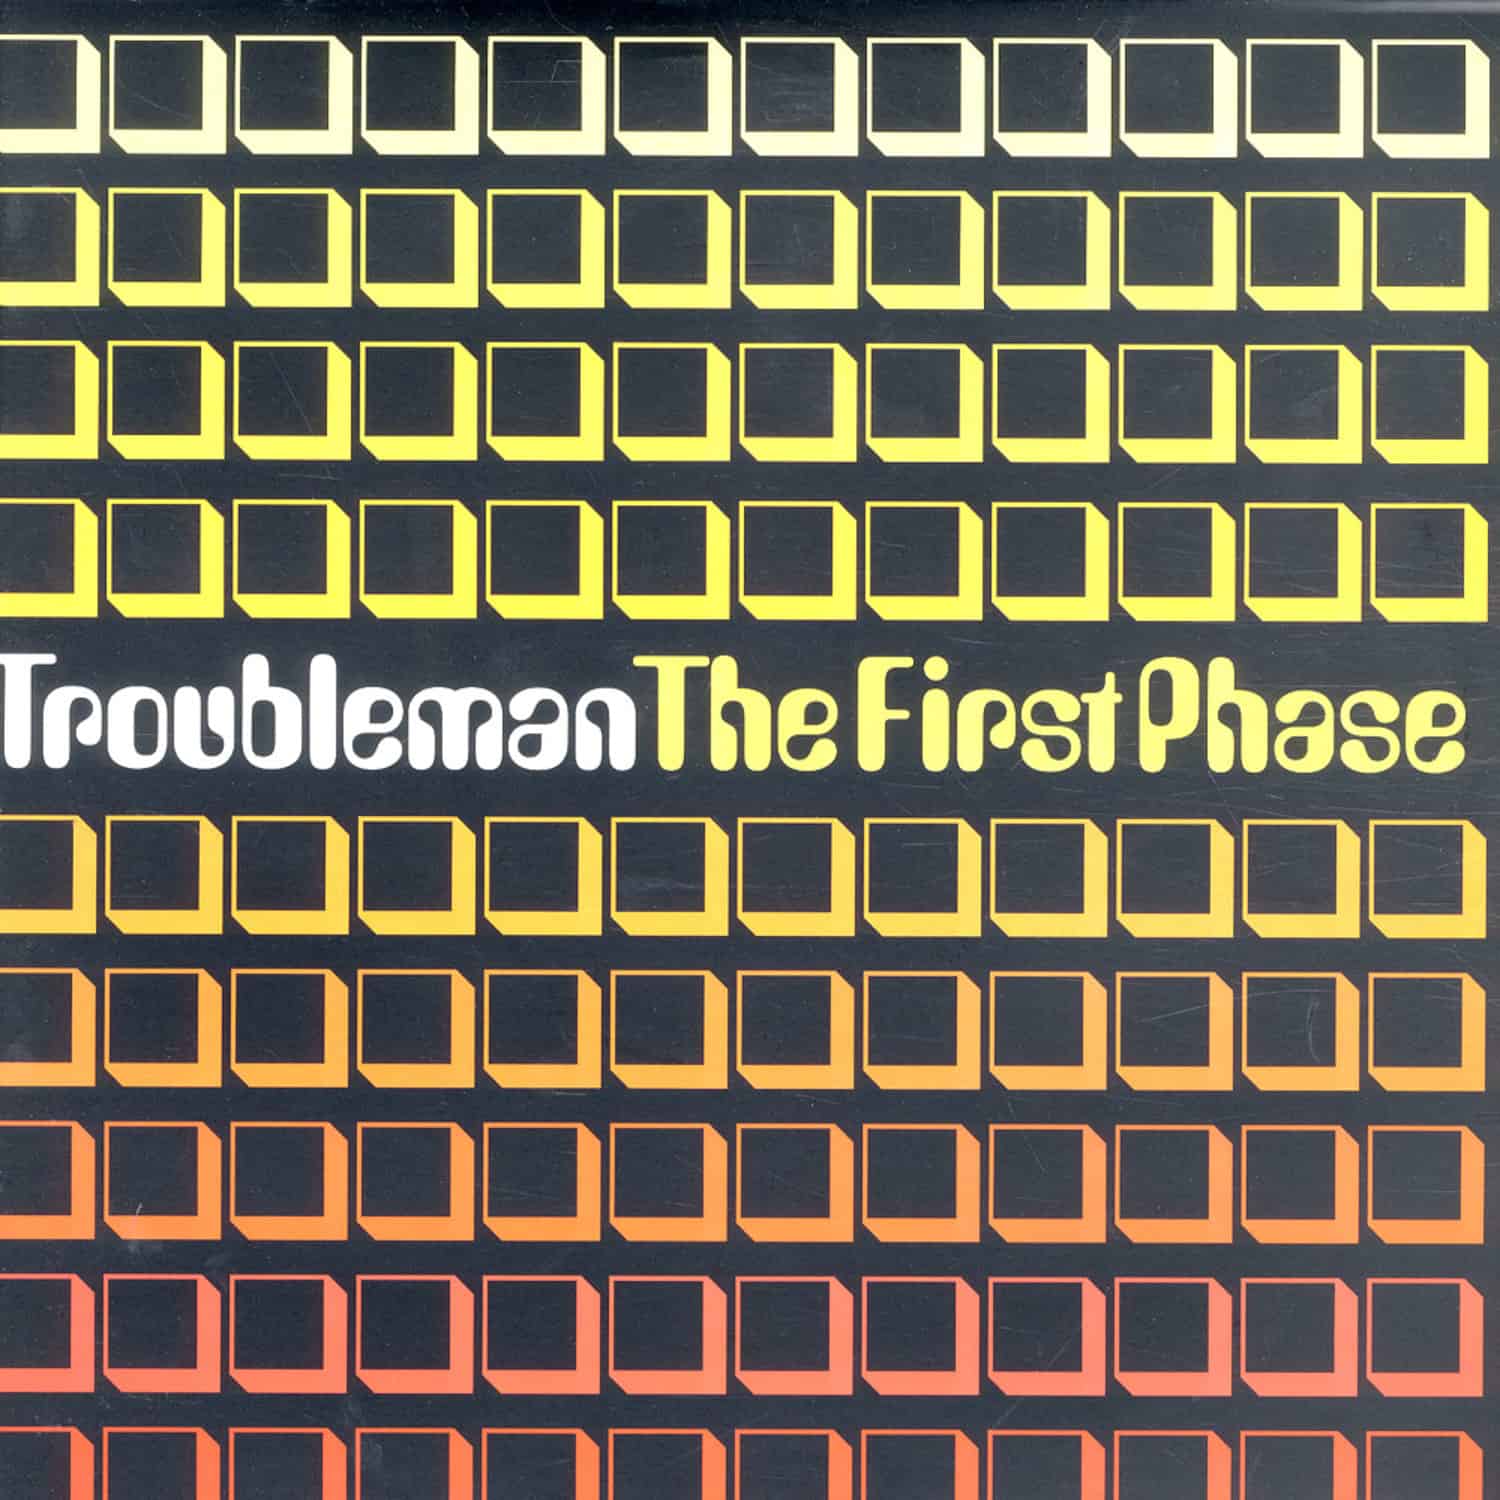 Troubleman - THE FIRST PHASE 